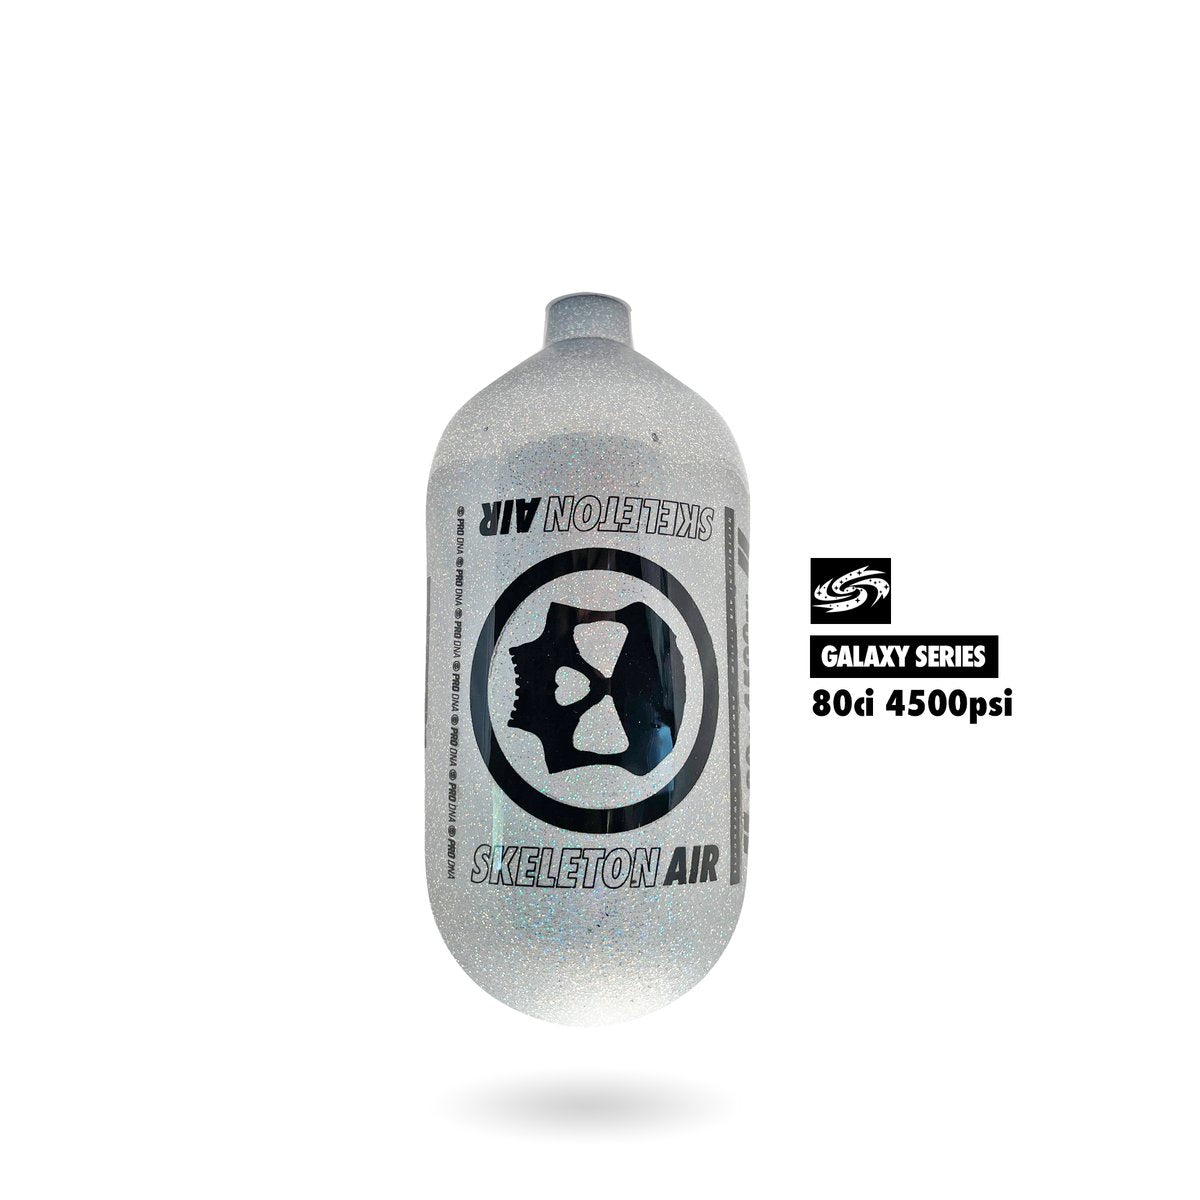 Infamous Skeleton Air "Hyperlight" Paintball Tank BOTTLE ONLY - Galaxy Series - Solar Silver - 80/4500 PSI